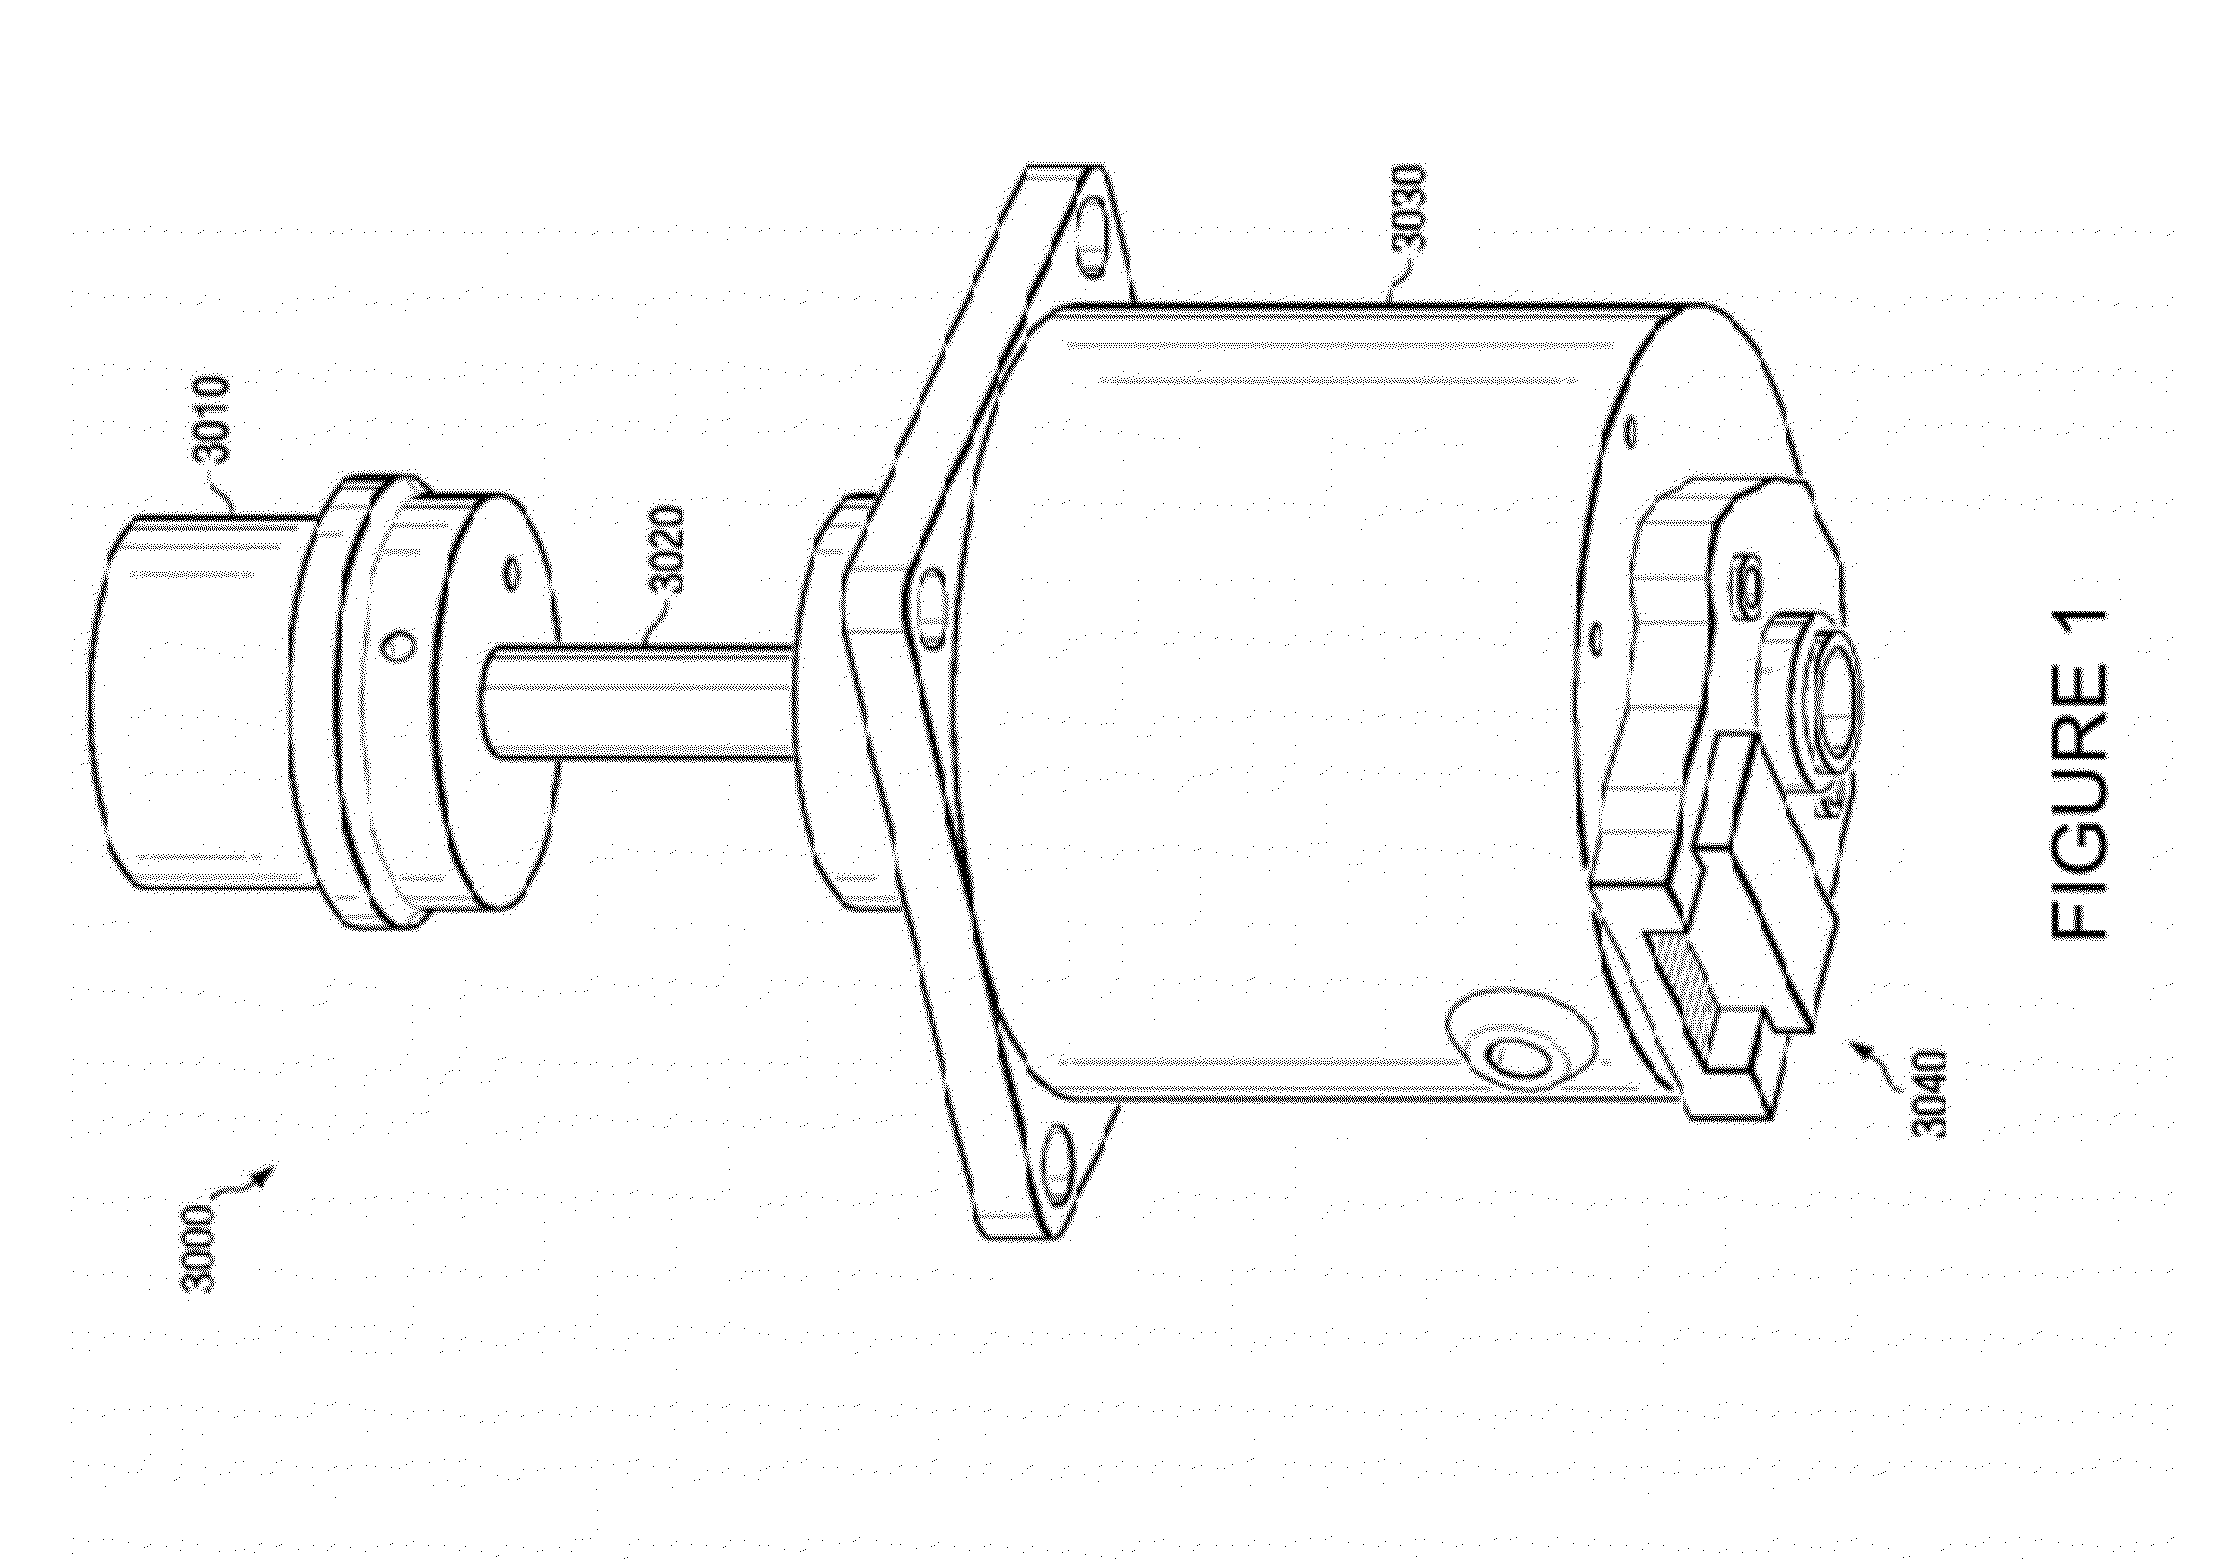 System and method for position control of a mechanical piston in a pump